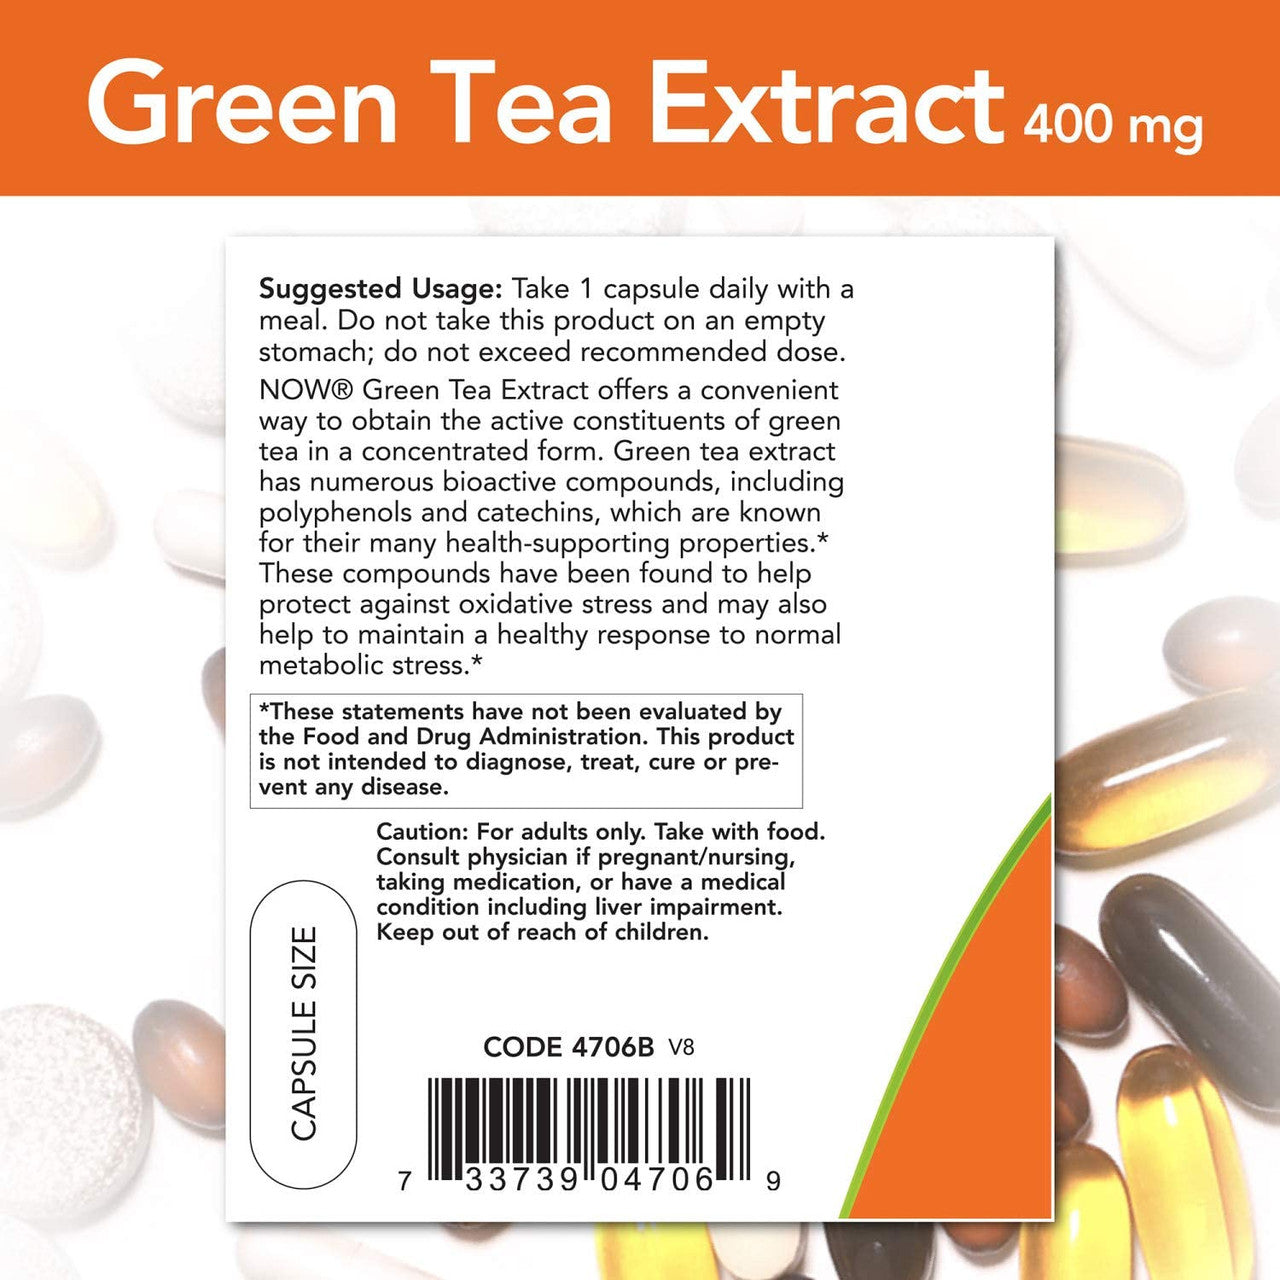 Now Green Tea Extract directions